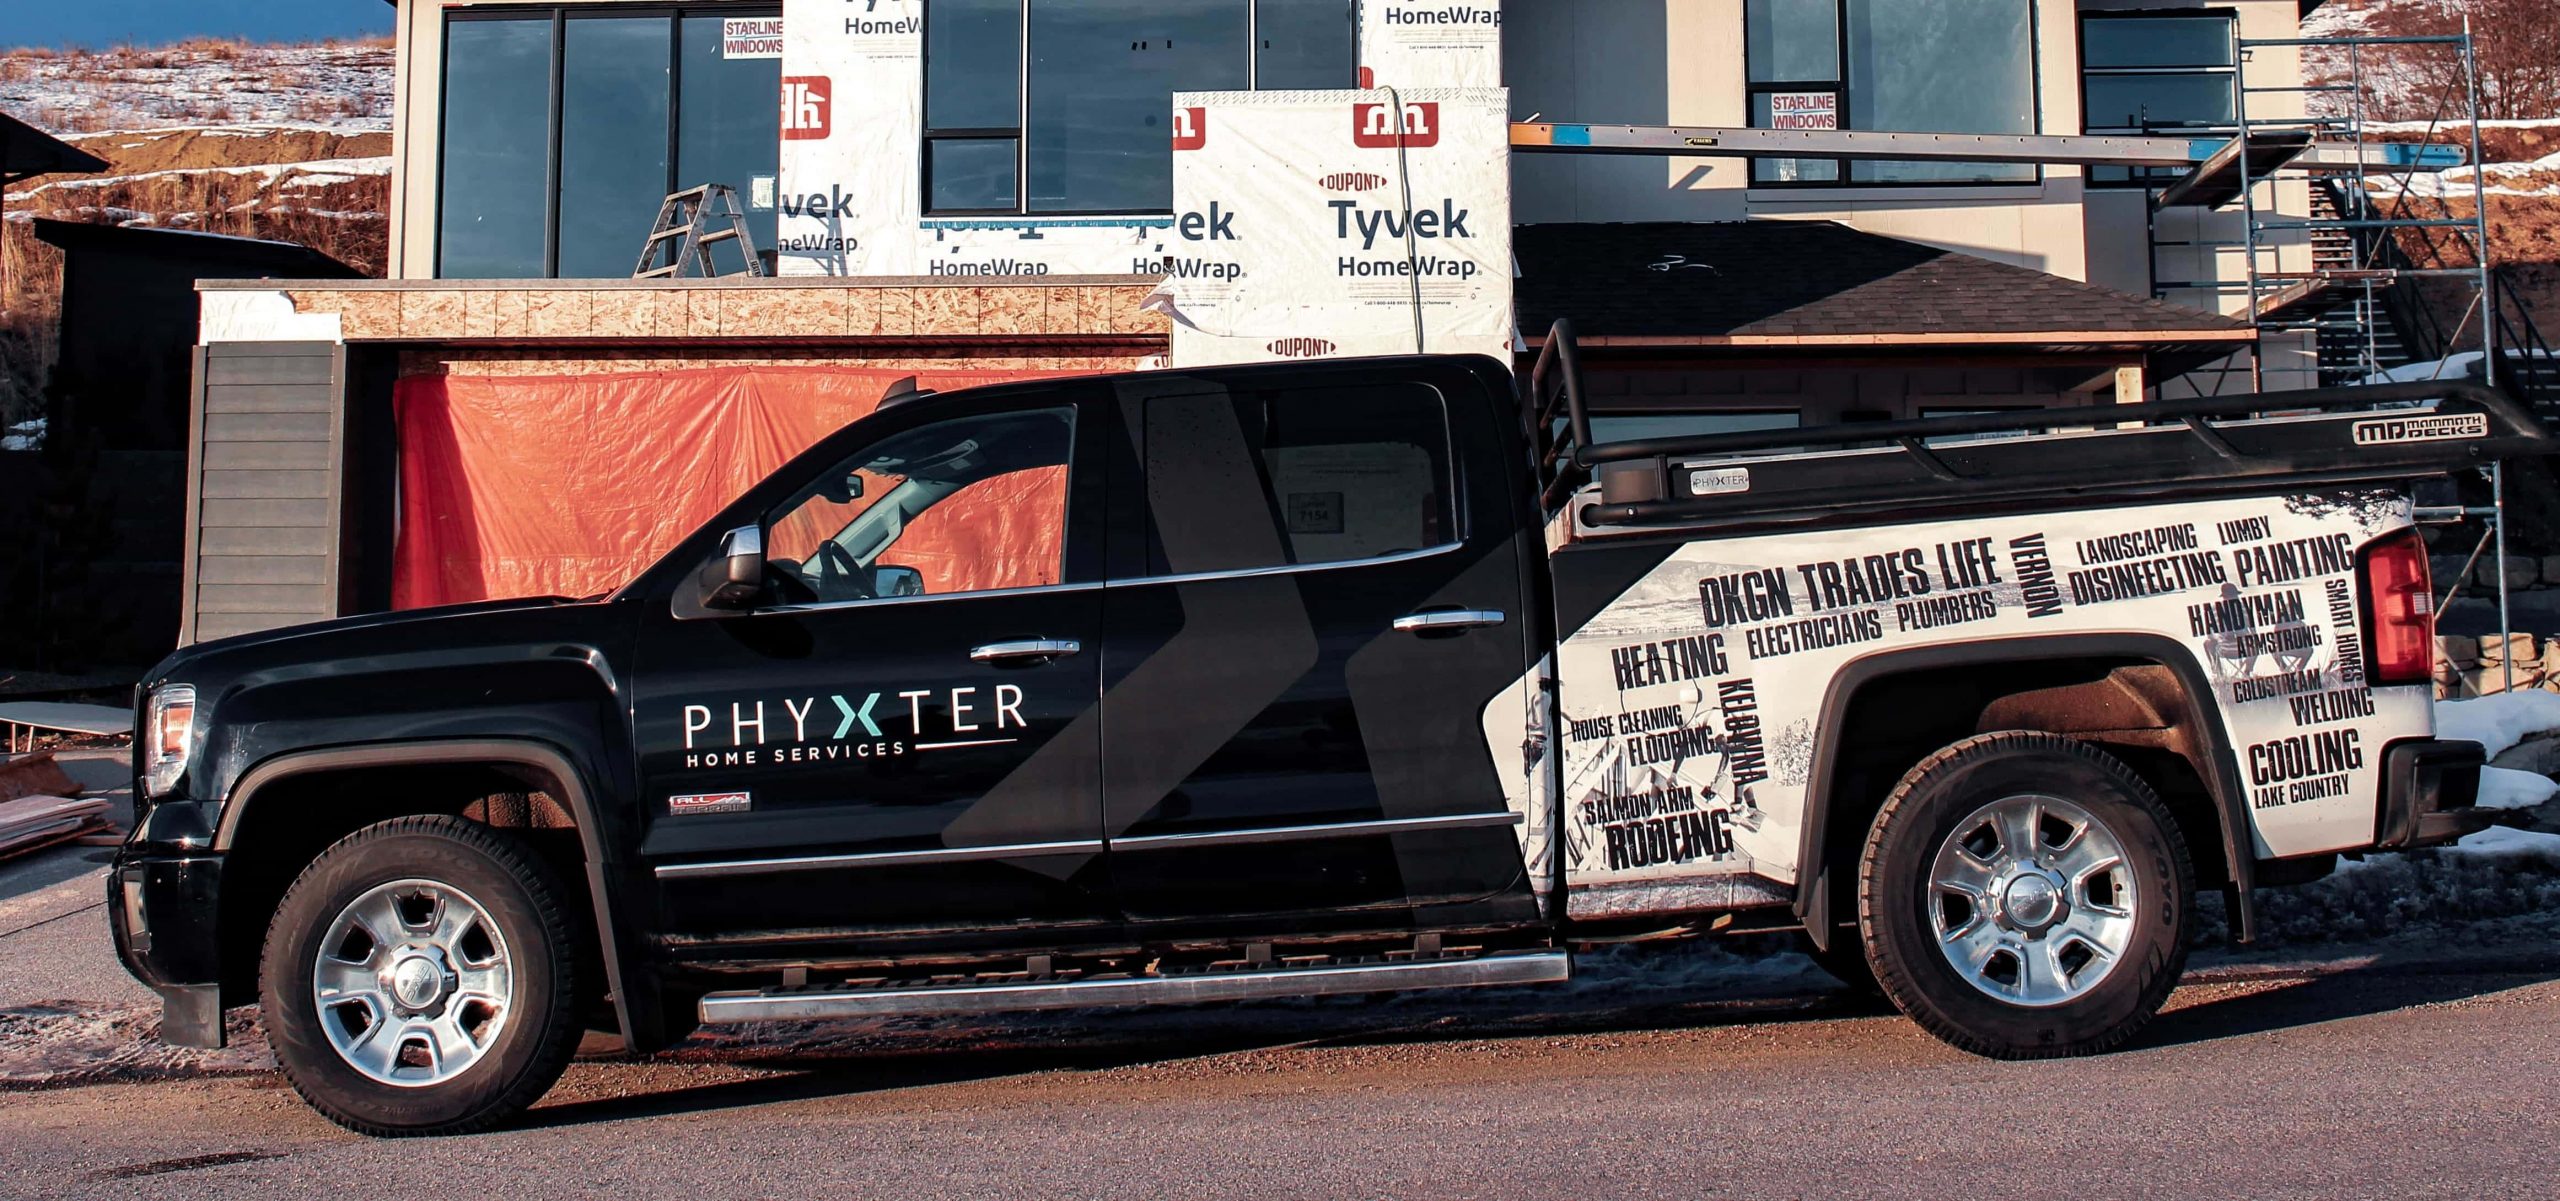 Phyxter Home Services in Vernon BC (1)